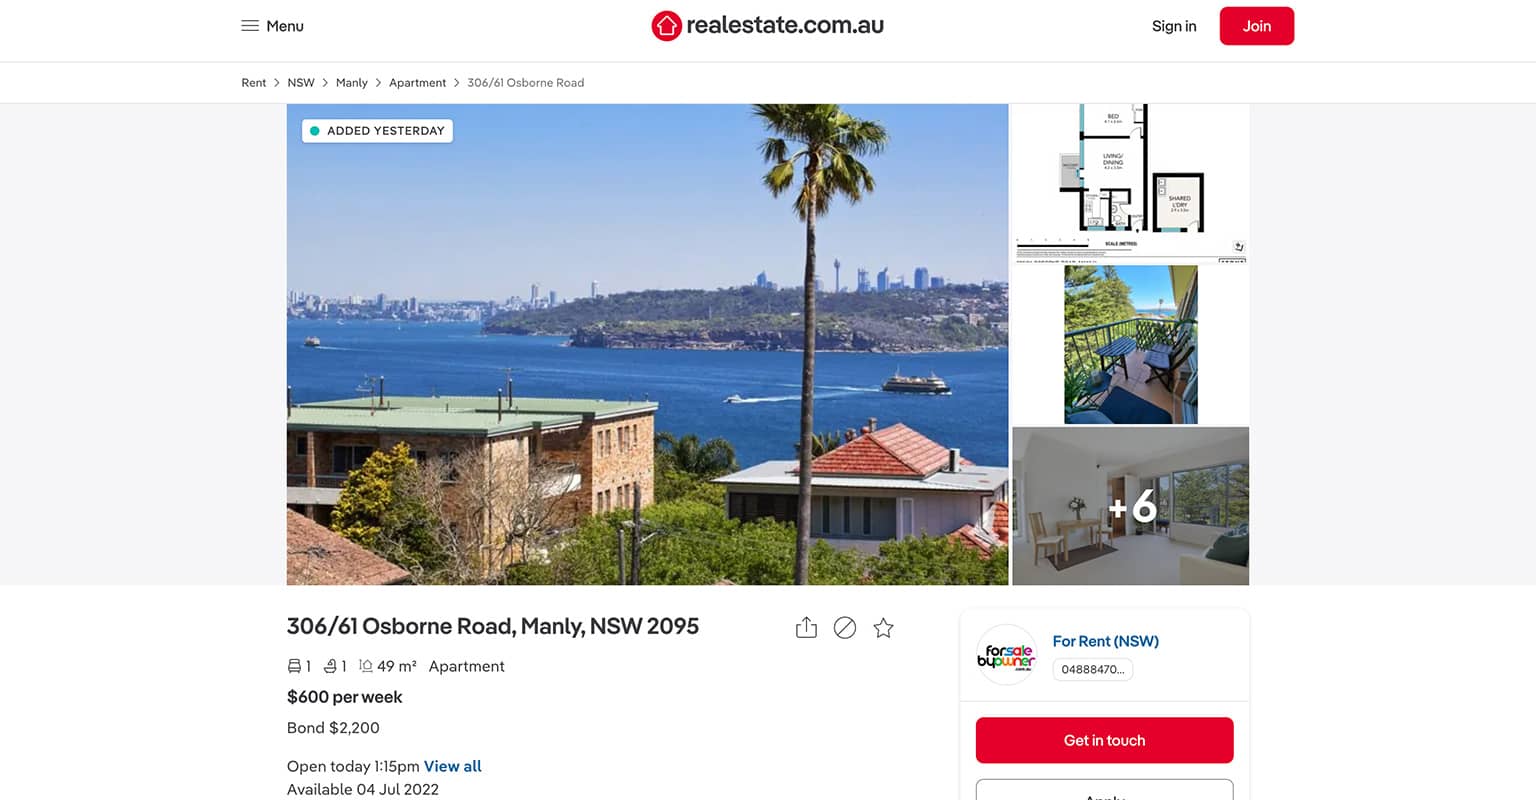 Advertise Rental On Realestate.com.au Without Agent